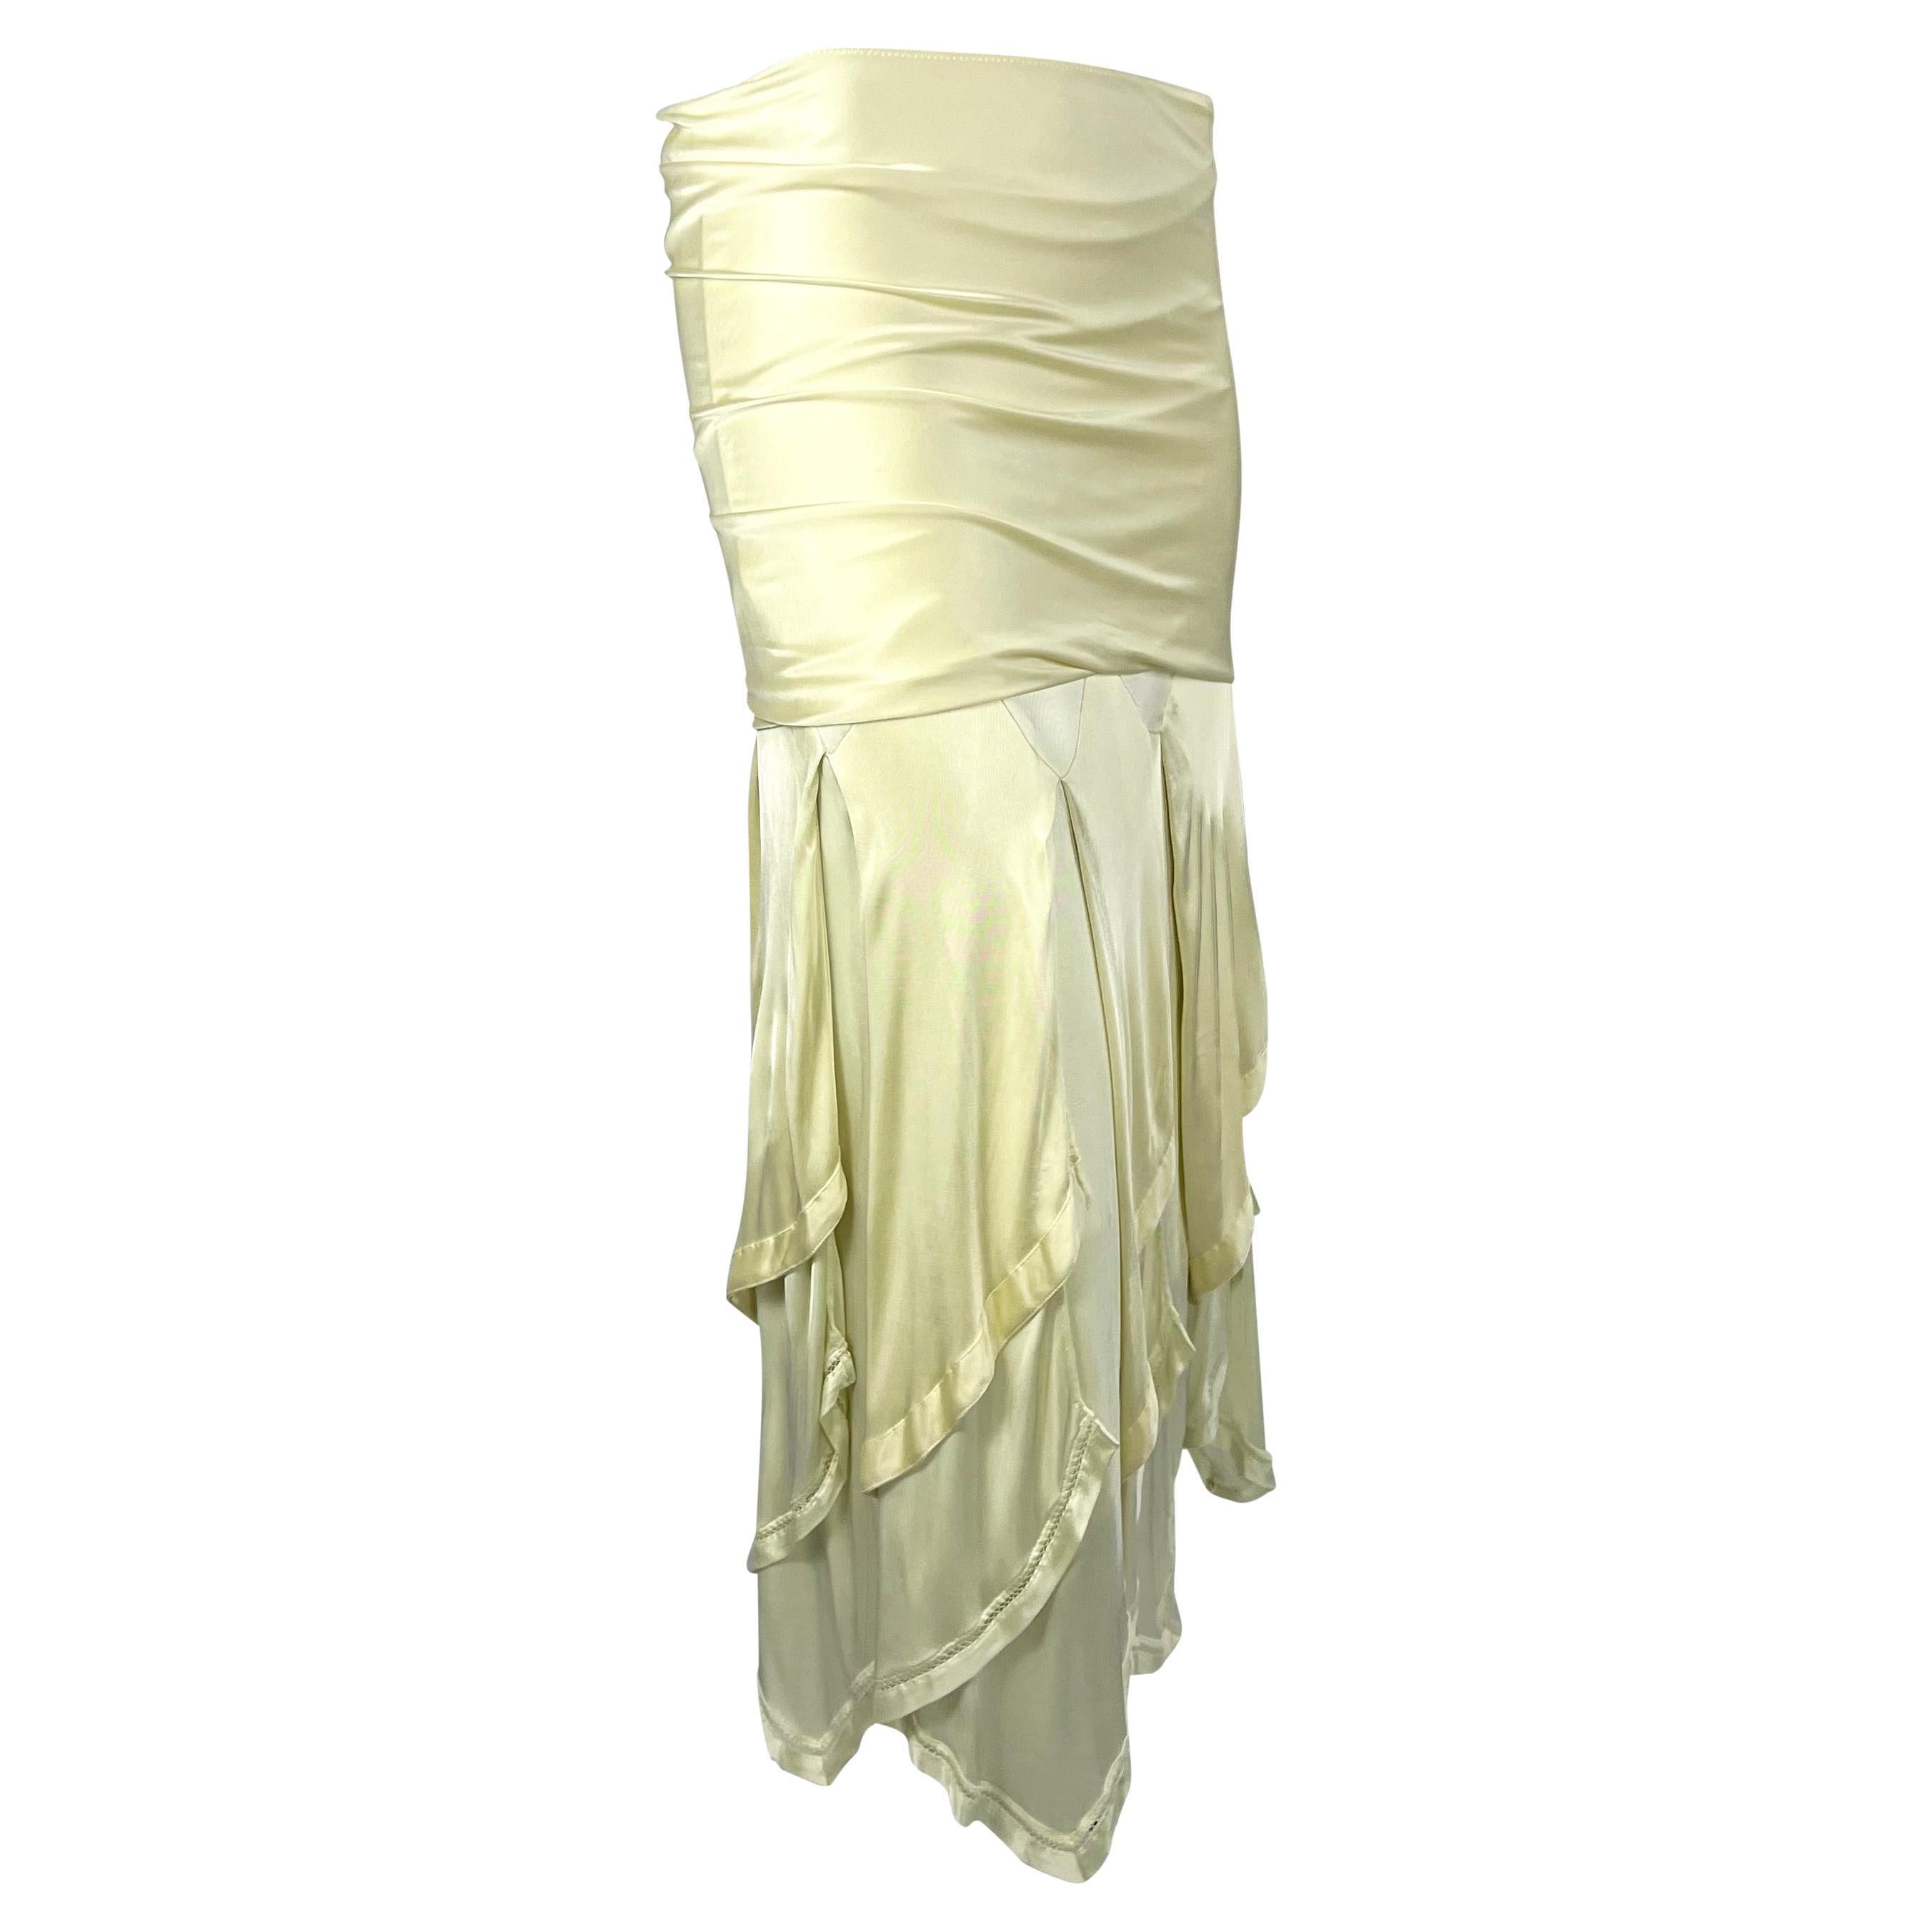 S/S 2004 Yves Saint Laurent by Tom Ford Runway Off-White Stretch Ruffle Skirt For Sale 4